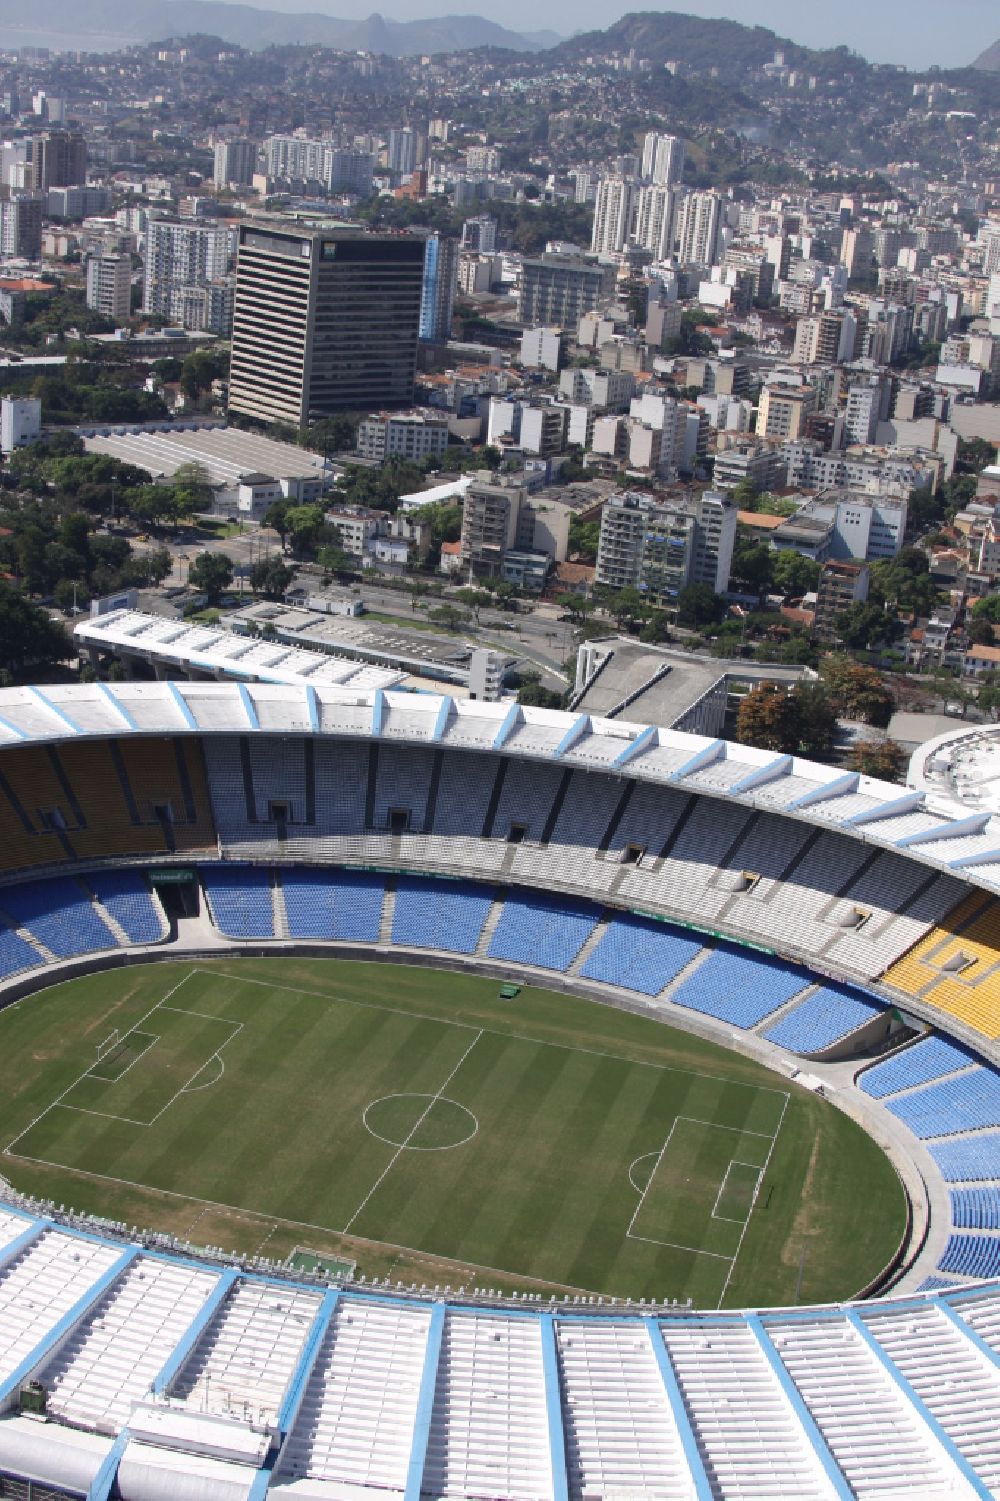 Aerial image Rio de Janeiro - Football stadium and concert hall in Rio de Janeiro, Brazil, during the 2014 FIFA World Cup renovated. The plant is used for soccer games, sports competitions and concerts. Openings for the 15th Pan American Games and the 2016 Summer Olympics and the Paralympics 2016, the hall is used